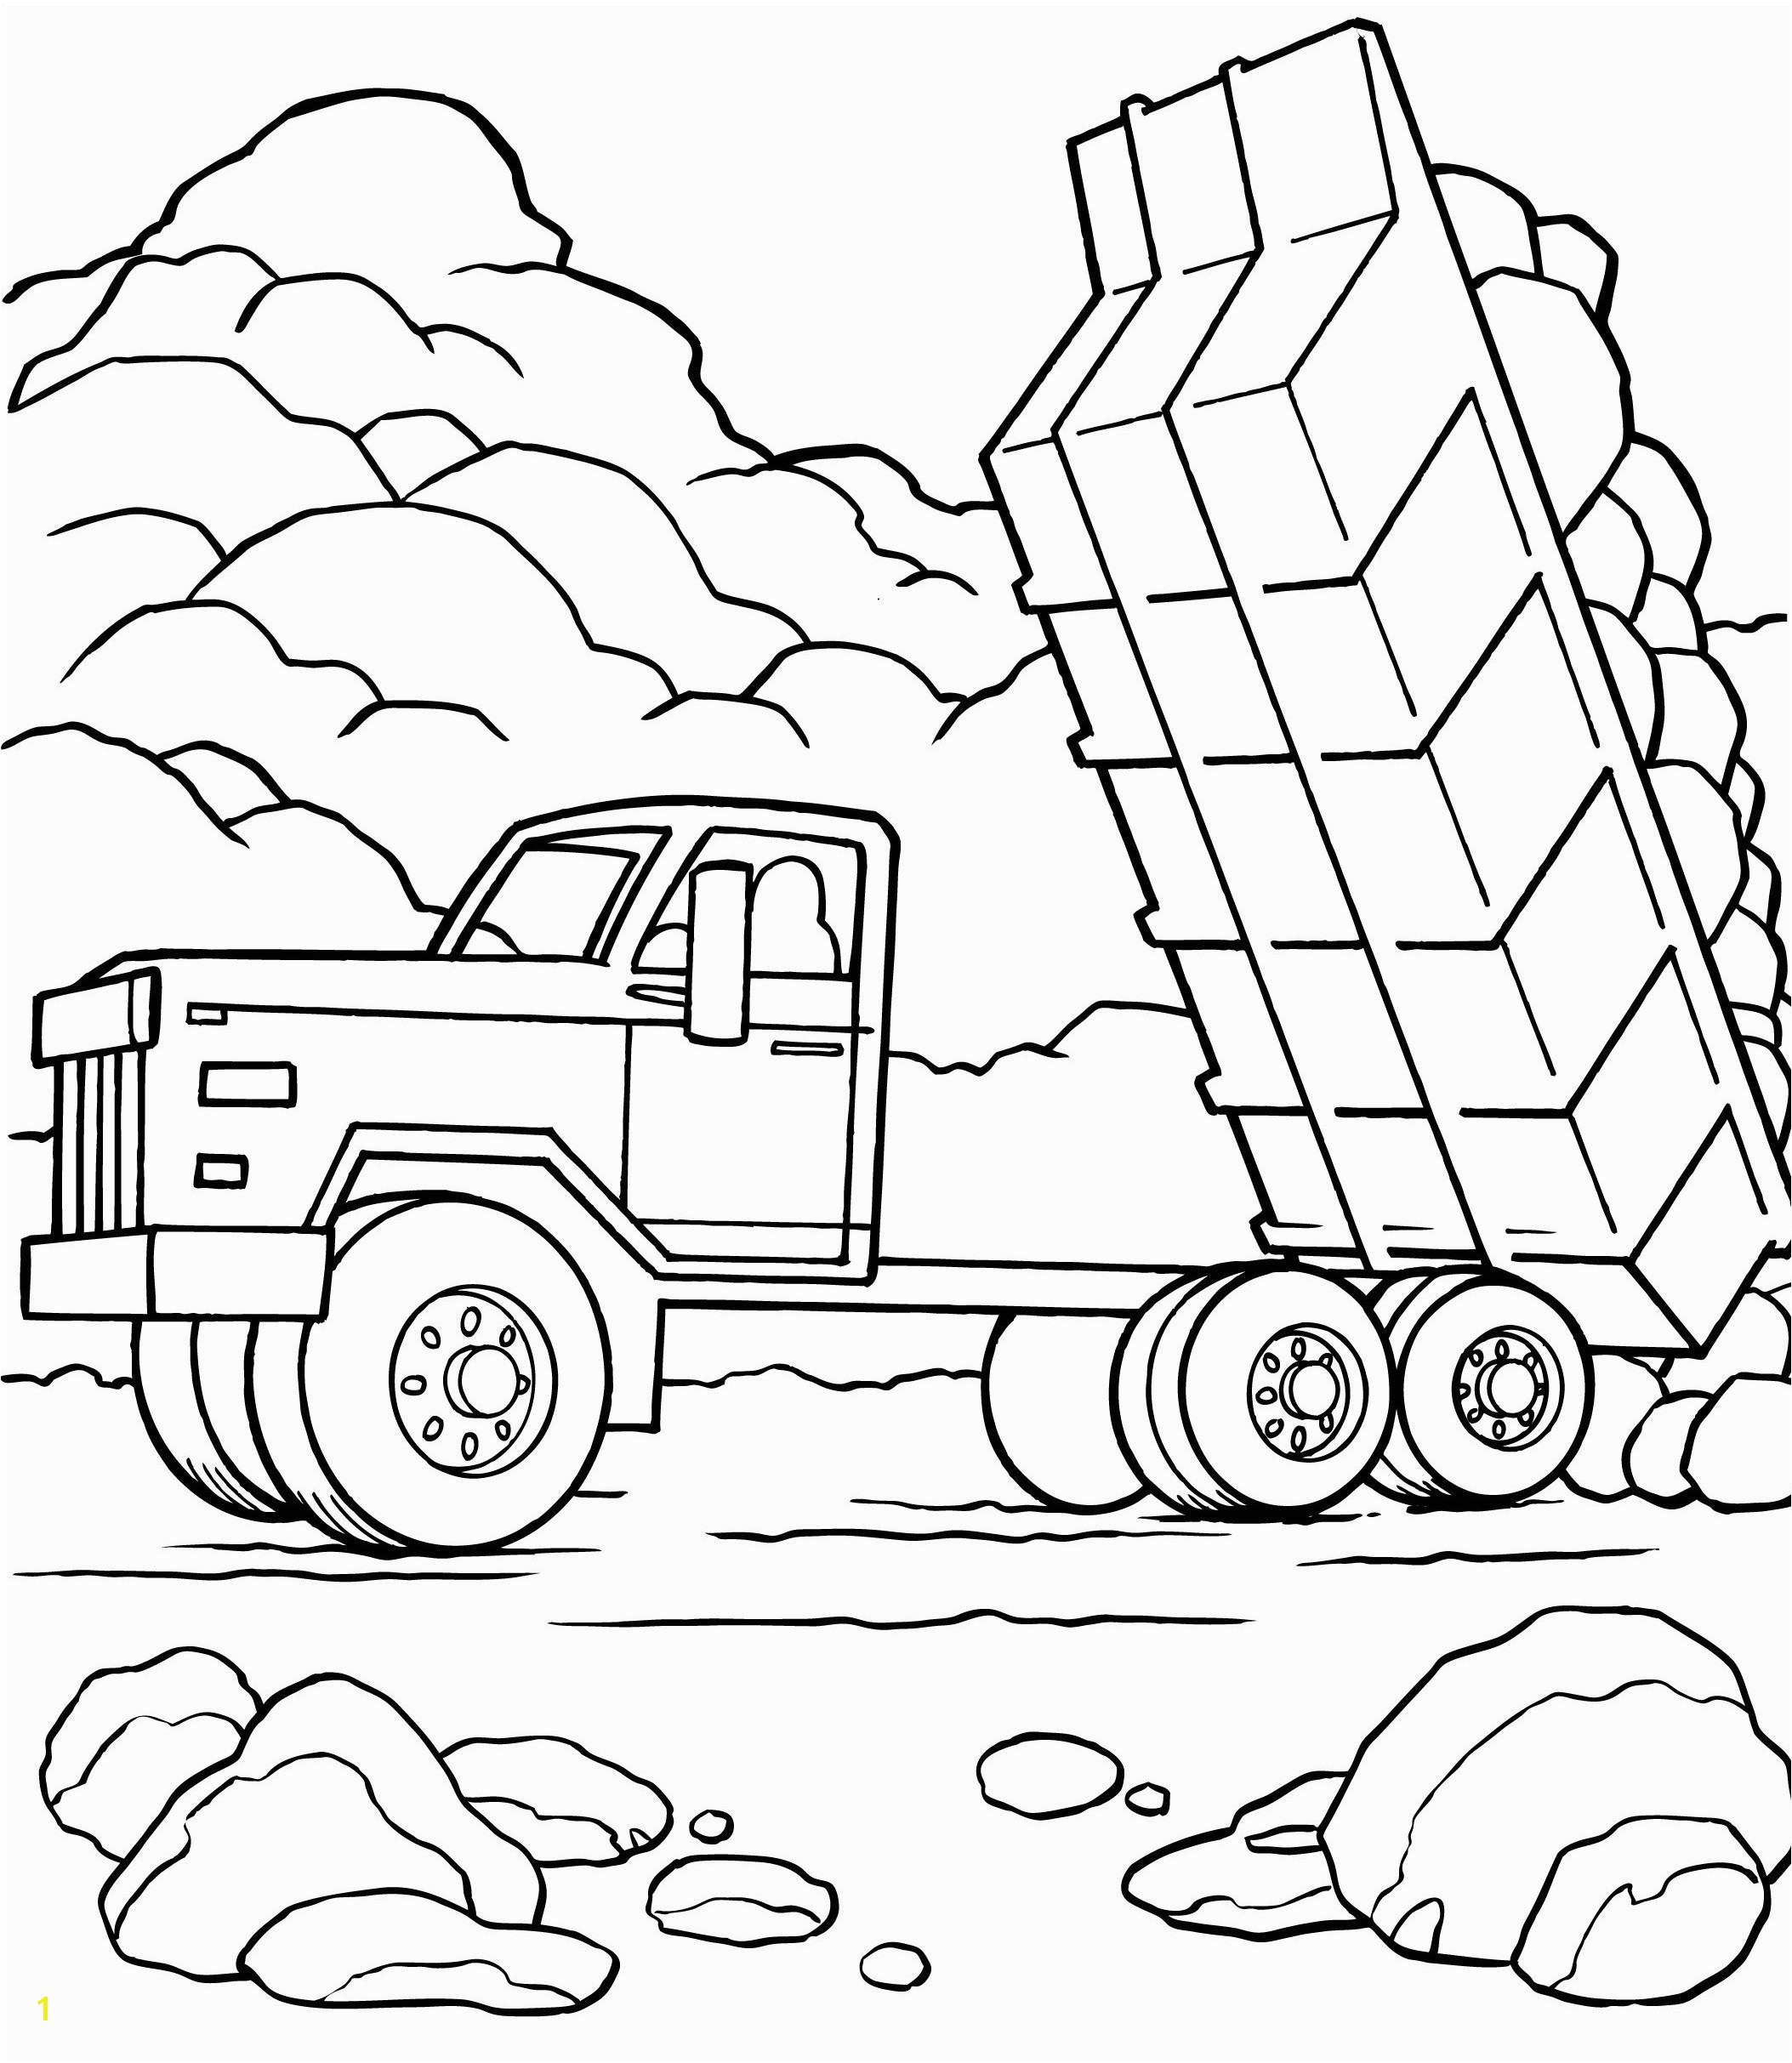 Ford F150 Coloring Page Vehicle Coloring Pages for Kids Crafting Dump Truck Coloring 11